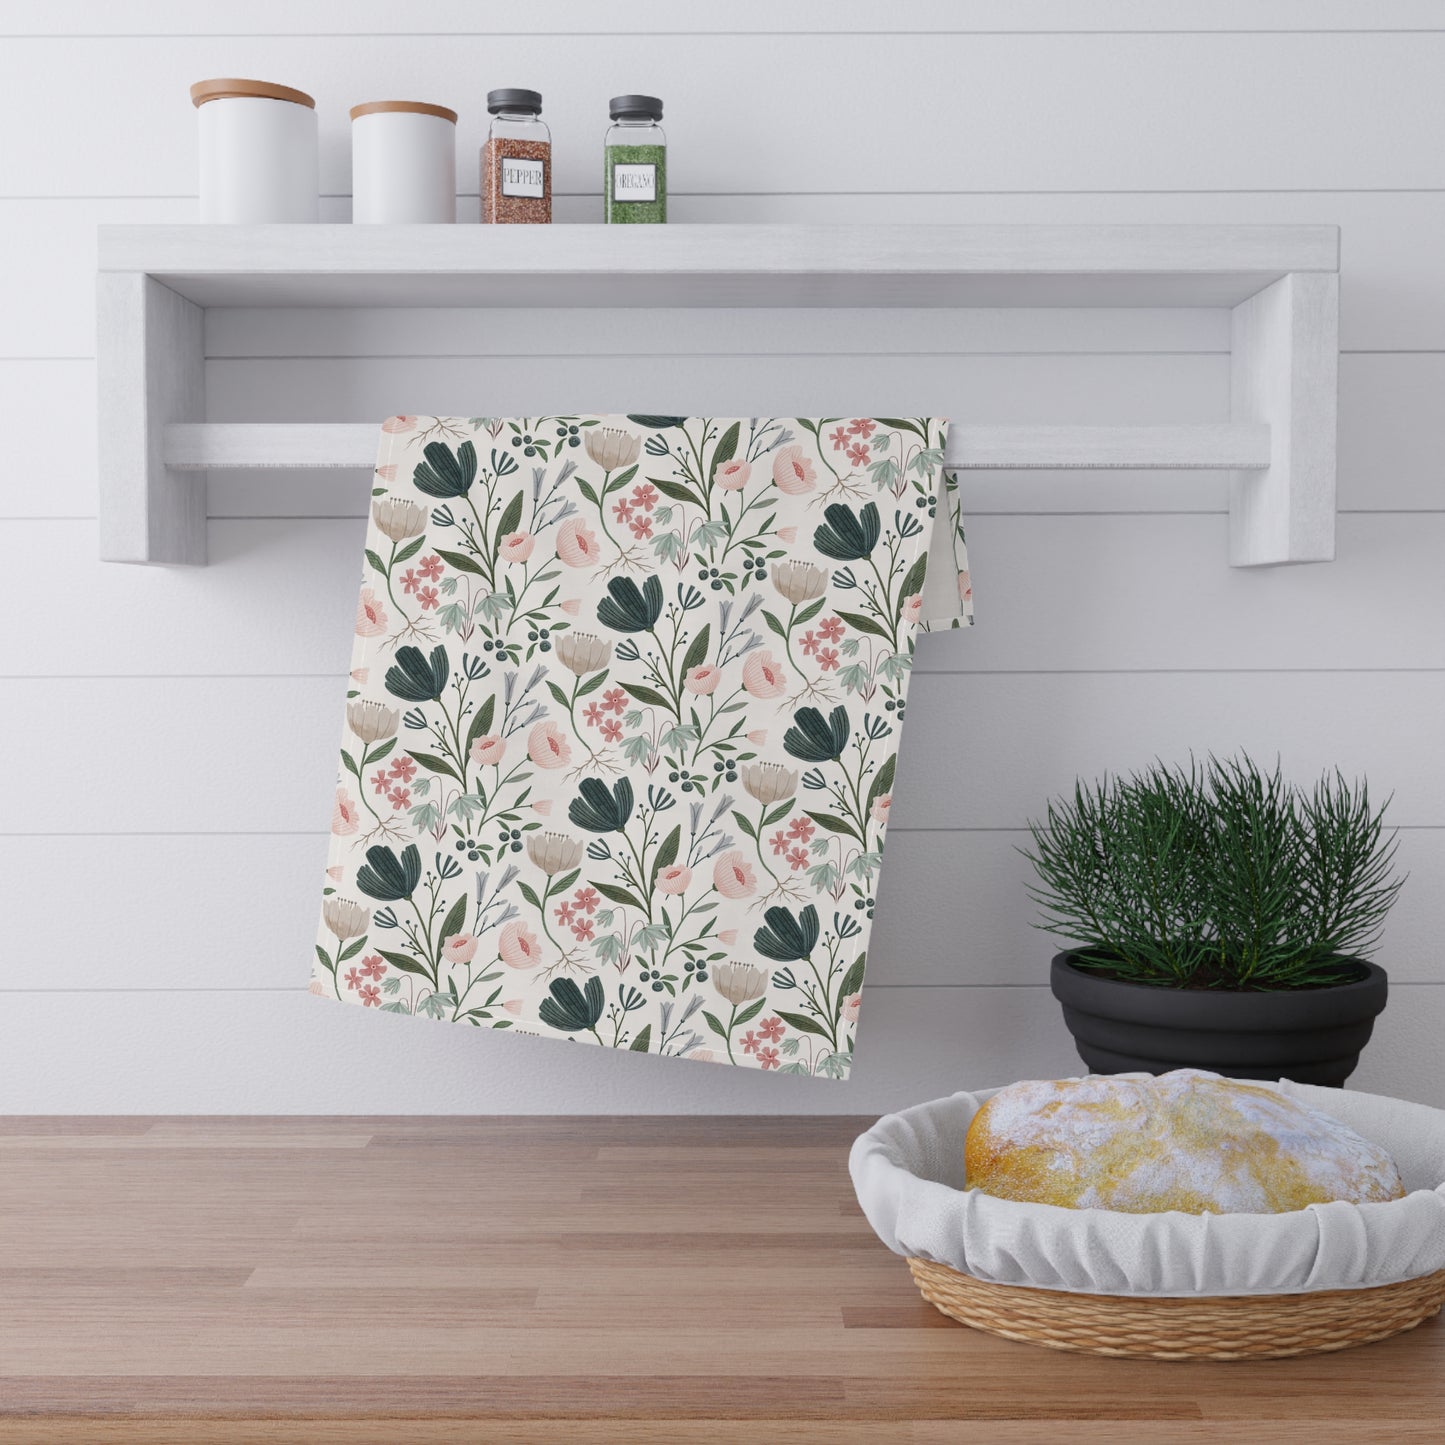 Lovely Day Floral Kitchen Towel